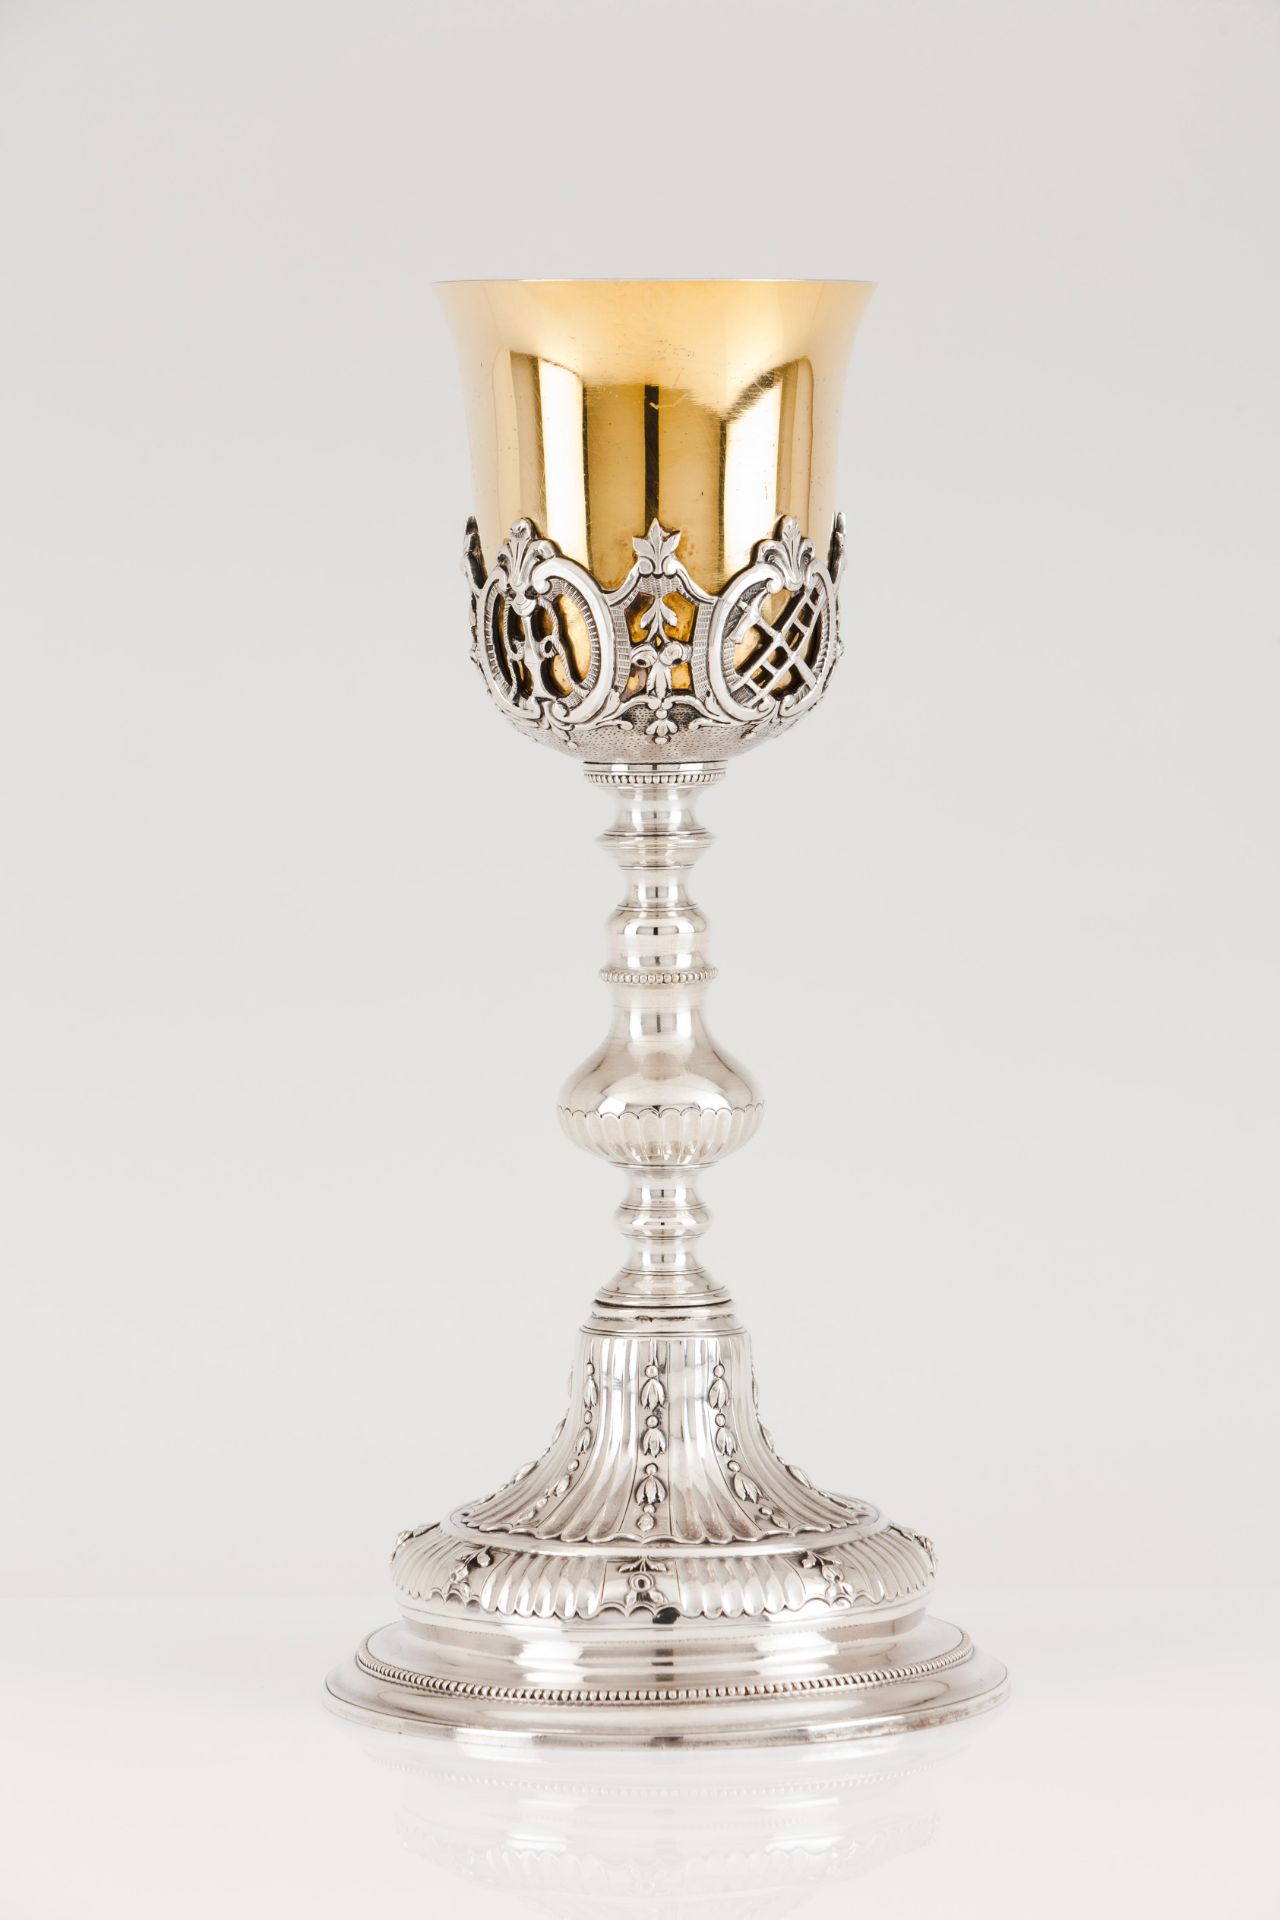 A chalice